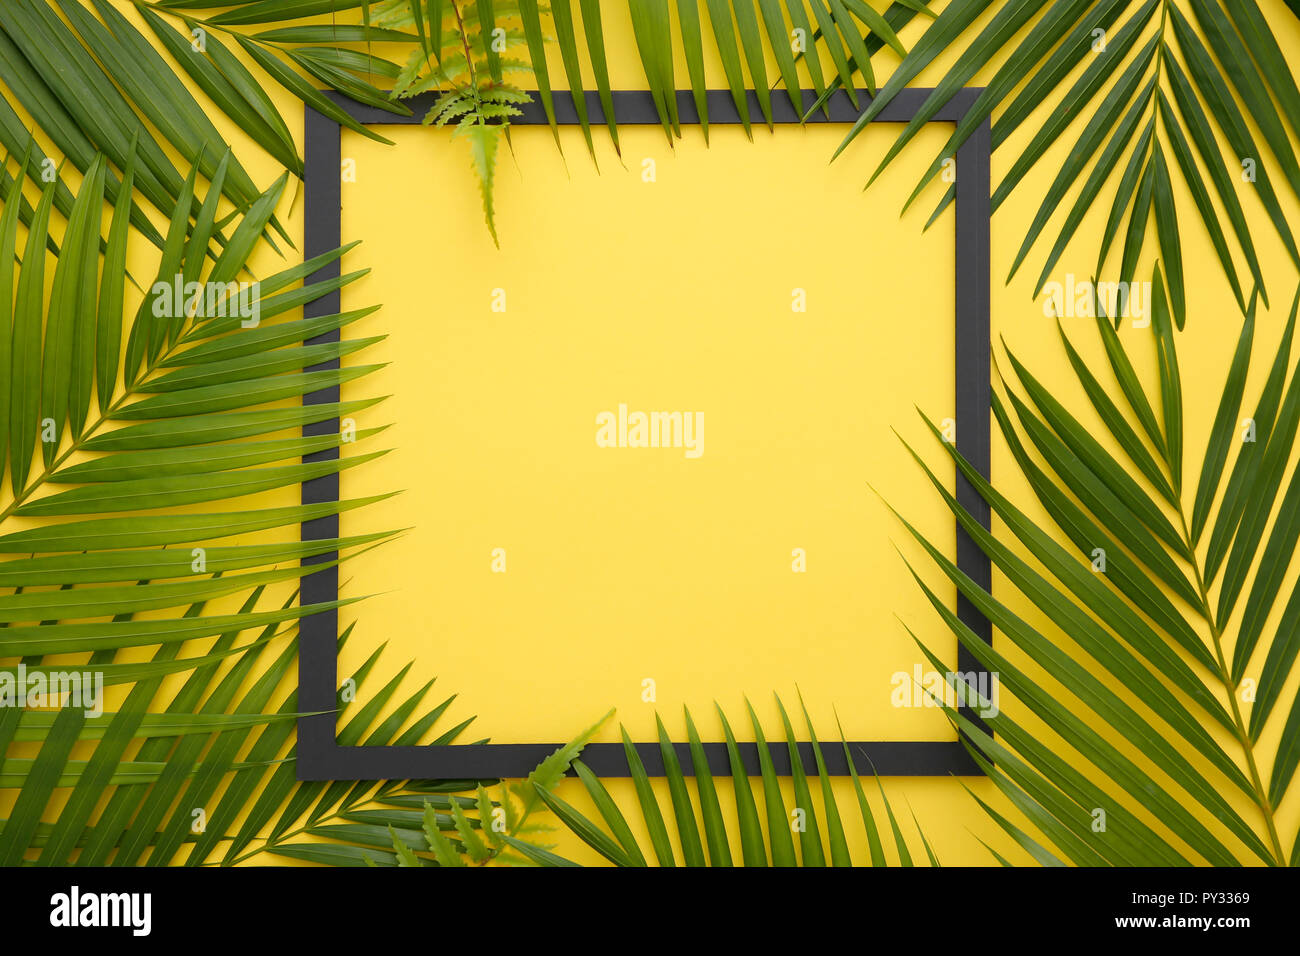 Greenery Concept photo, leave pattern summer background and frame ...